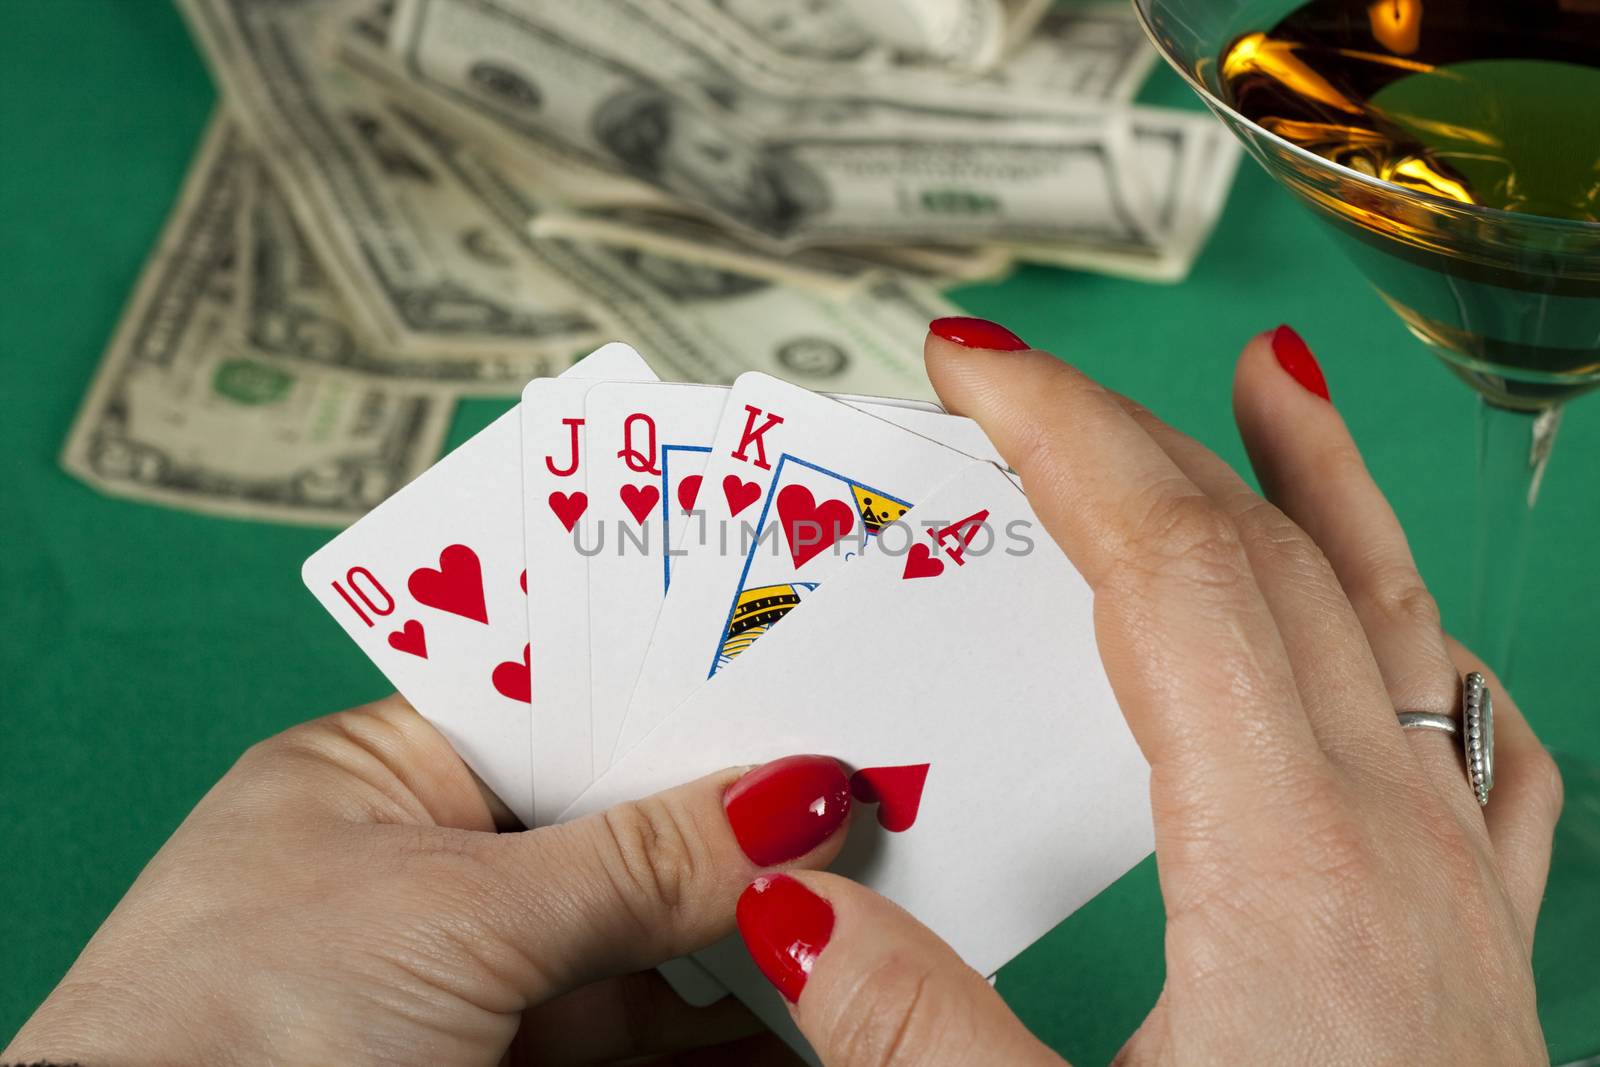 poker cards on green table with dollars